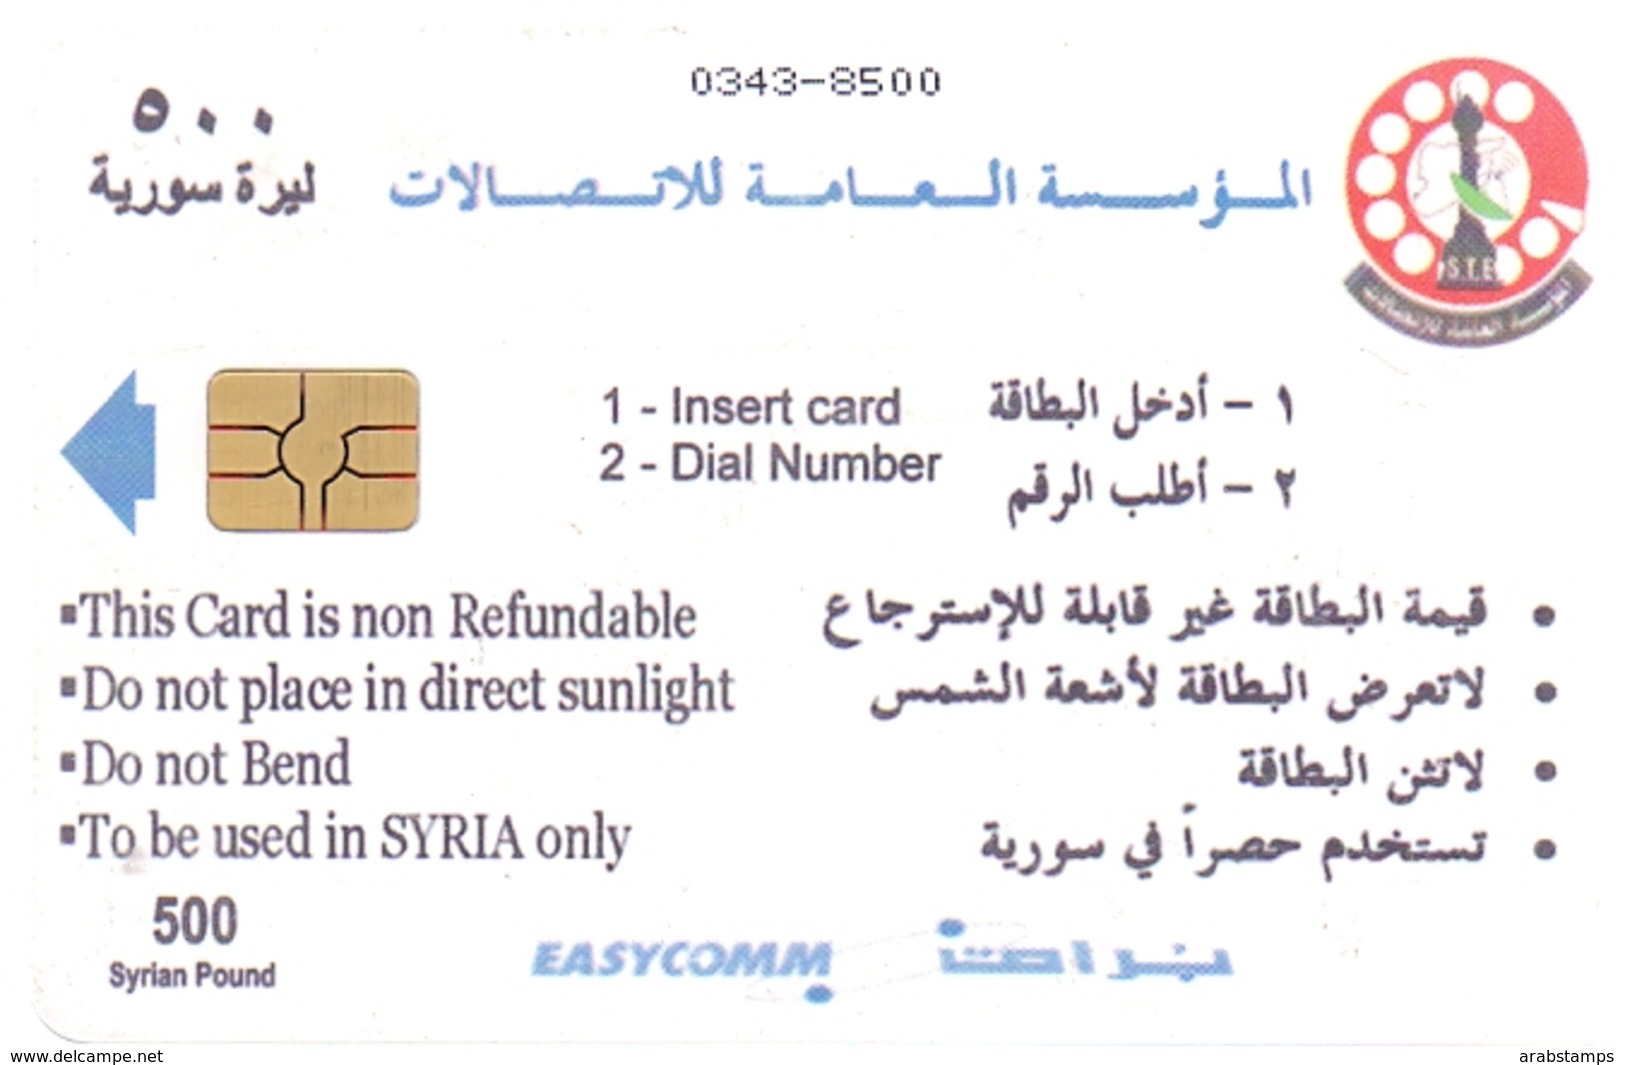 Syria Phonecards Used The Value 500 Syrian Pound - Syria